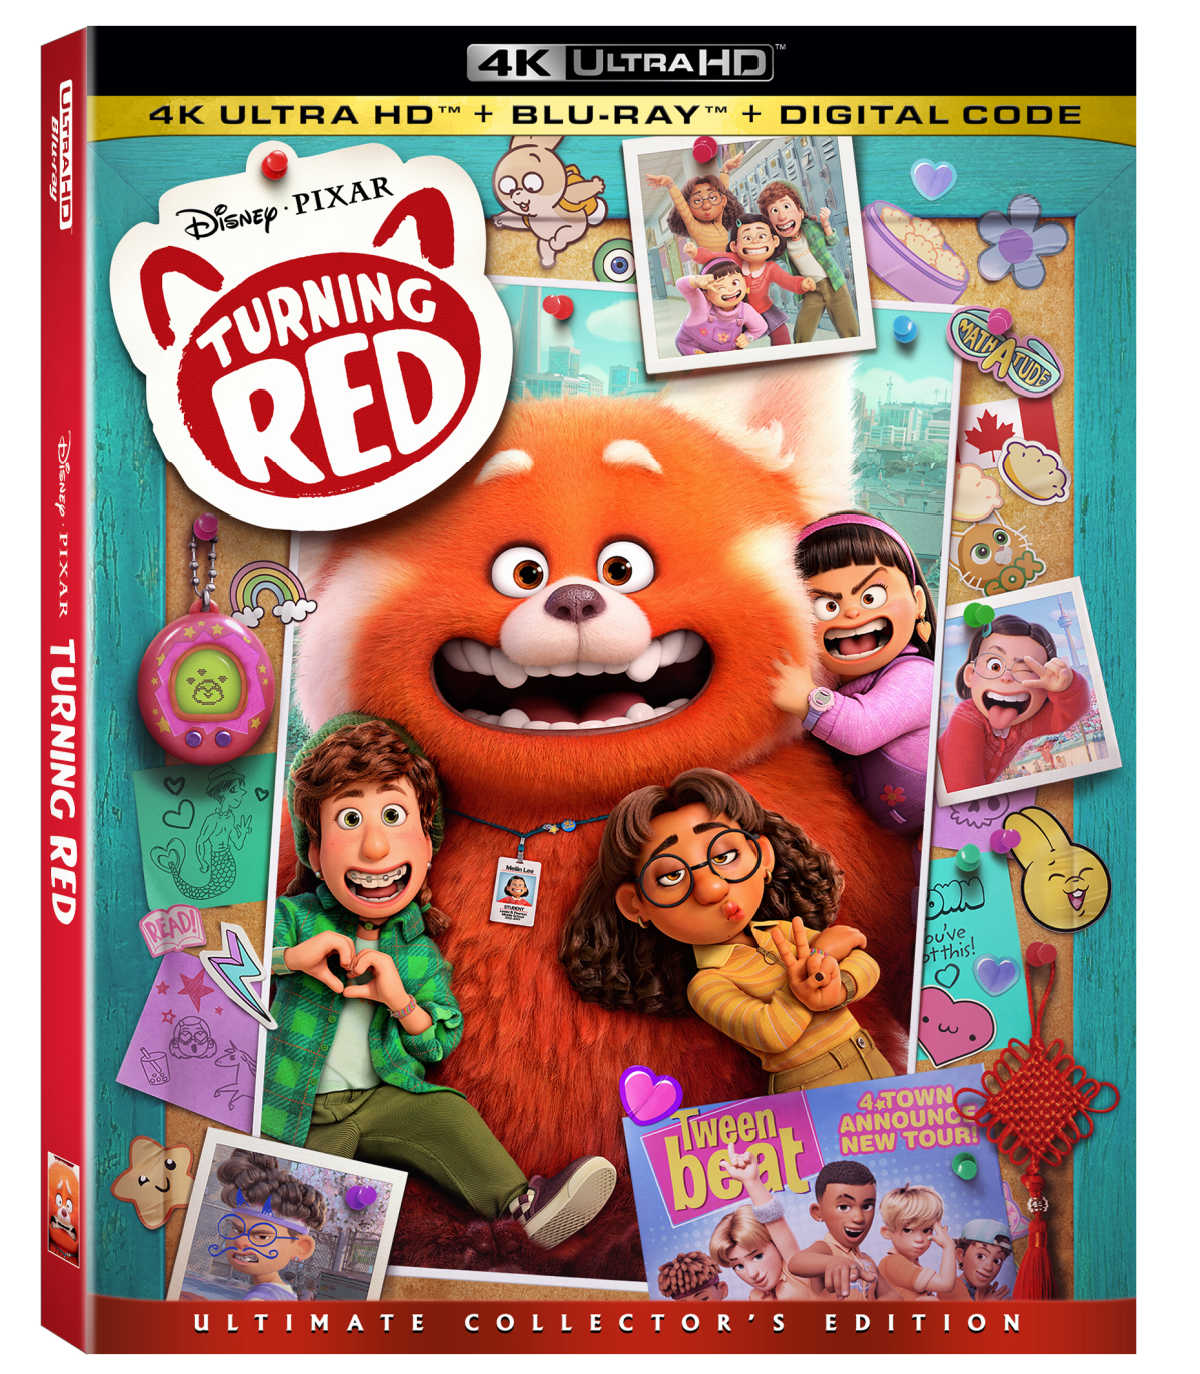 It's time to get the Turning Red Collector's Edition, so you can watch the movie and bonuses on 4K Ultra HD, blu-ray and digital.